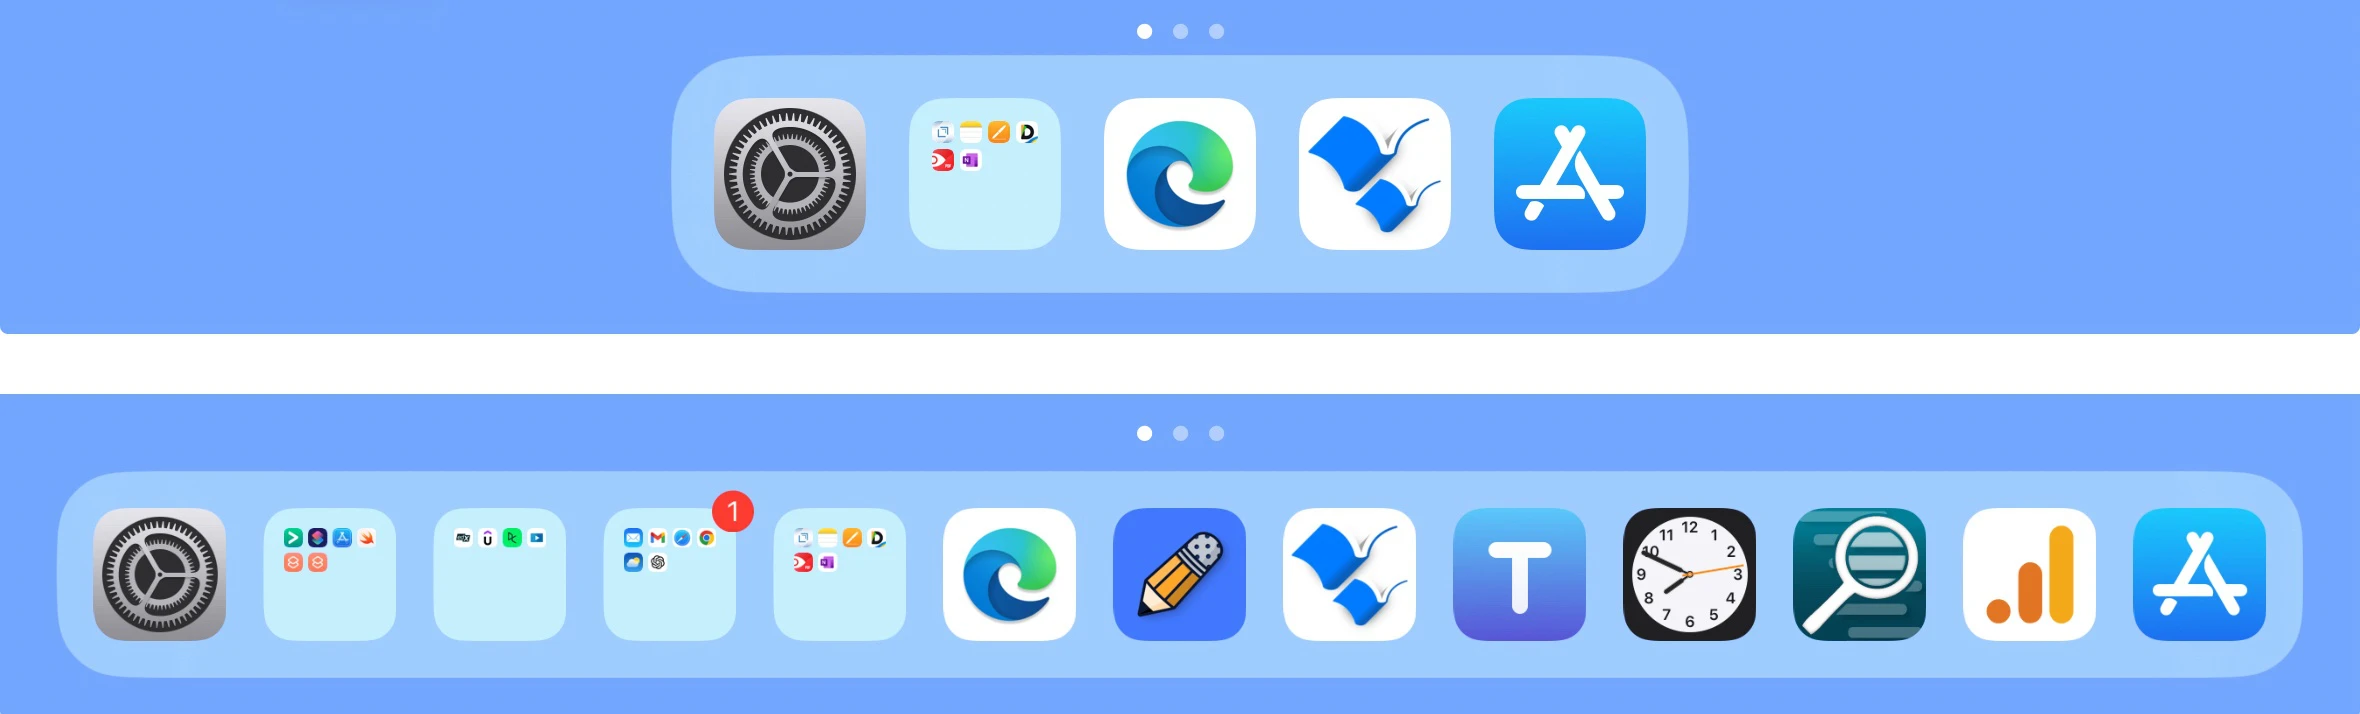 iPadOS 17 dock in two sizes - with a few apps and with many apps, to show how the dock resizes itself as apps and folders are added to it.